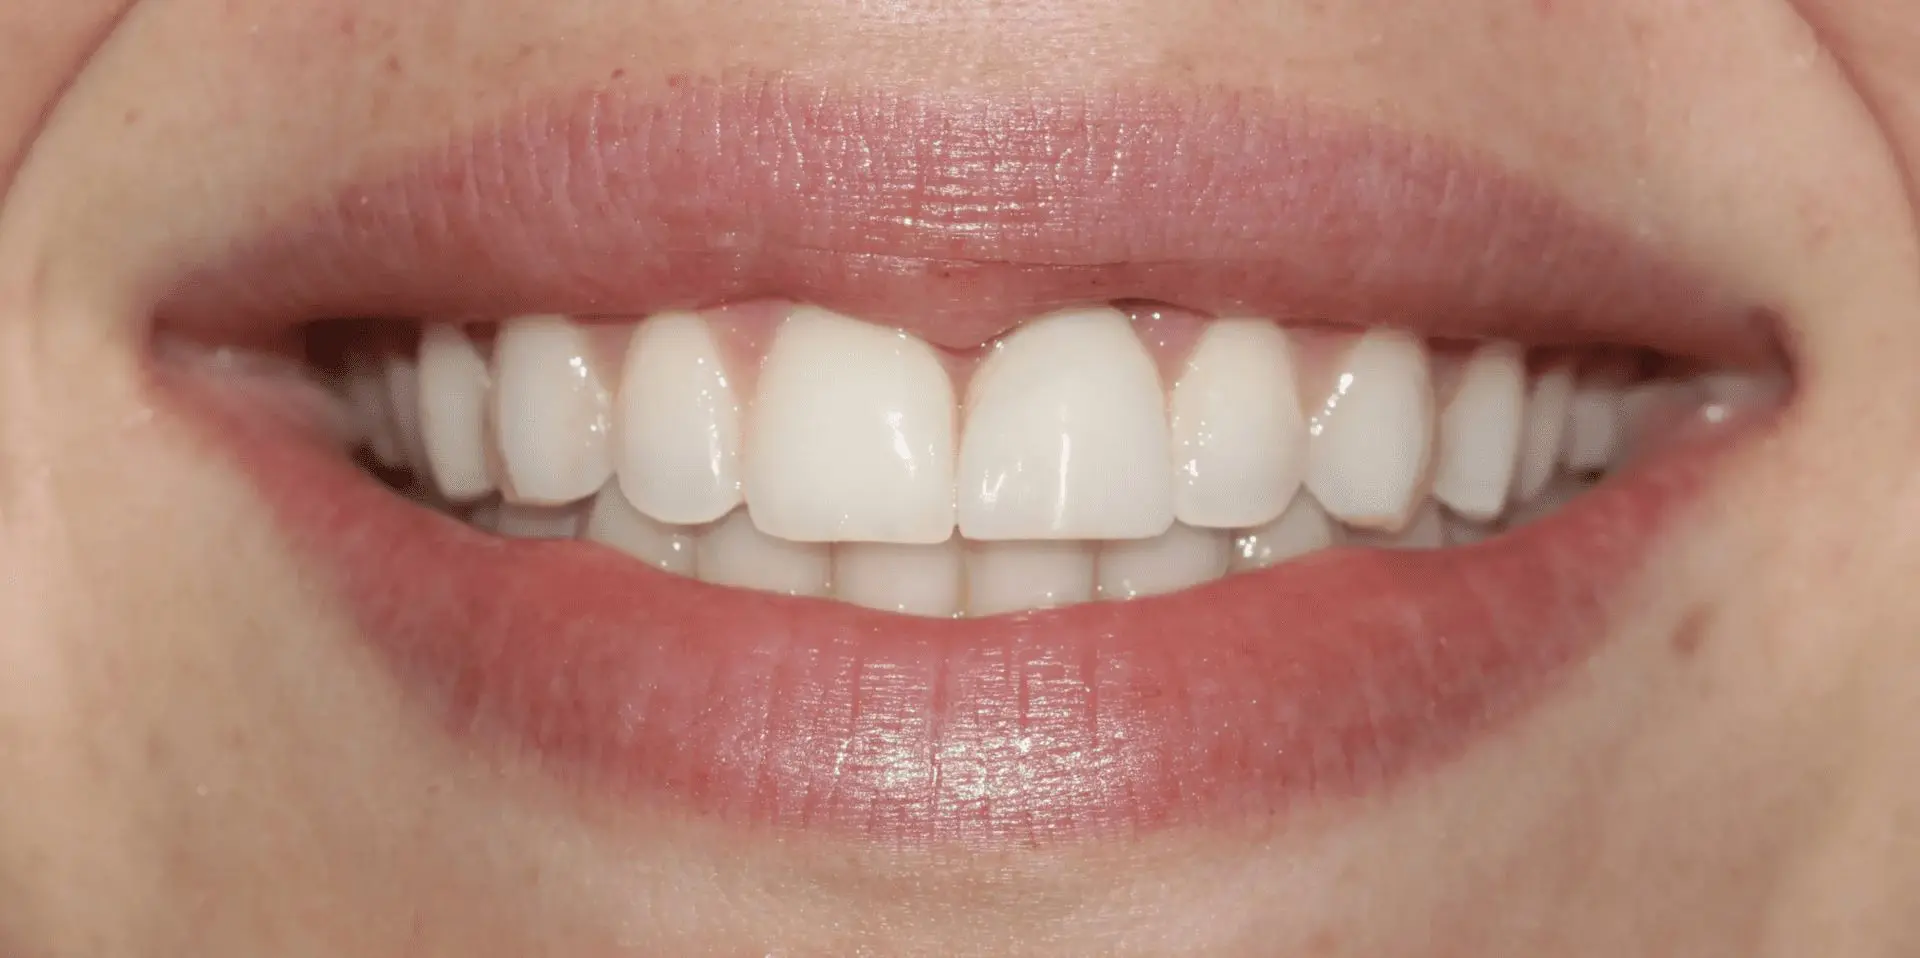 A close up of the teeth and smile of a woman